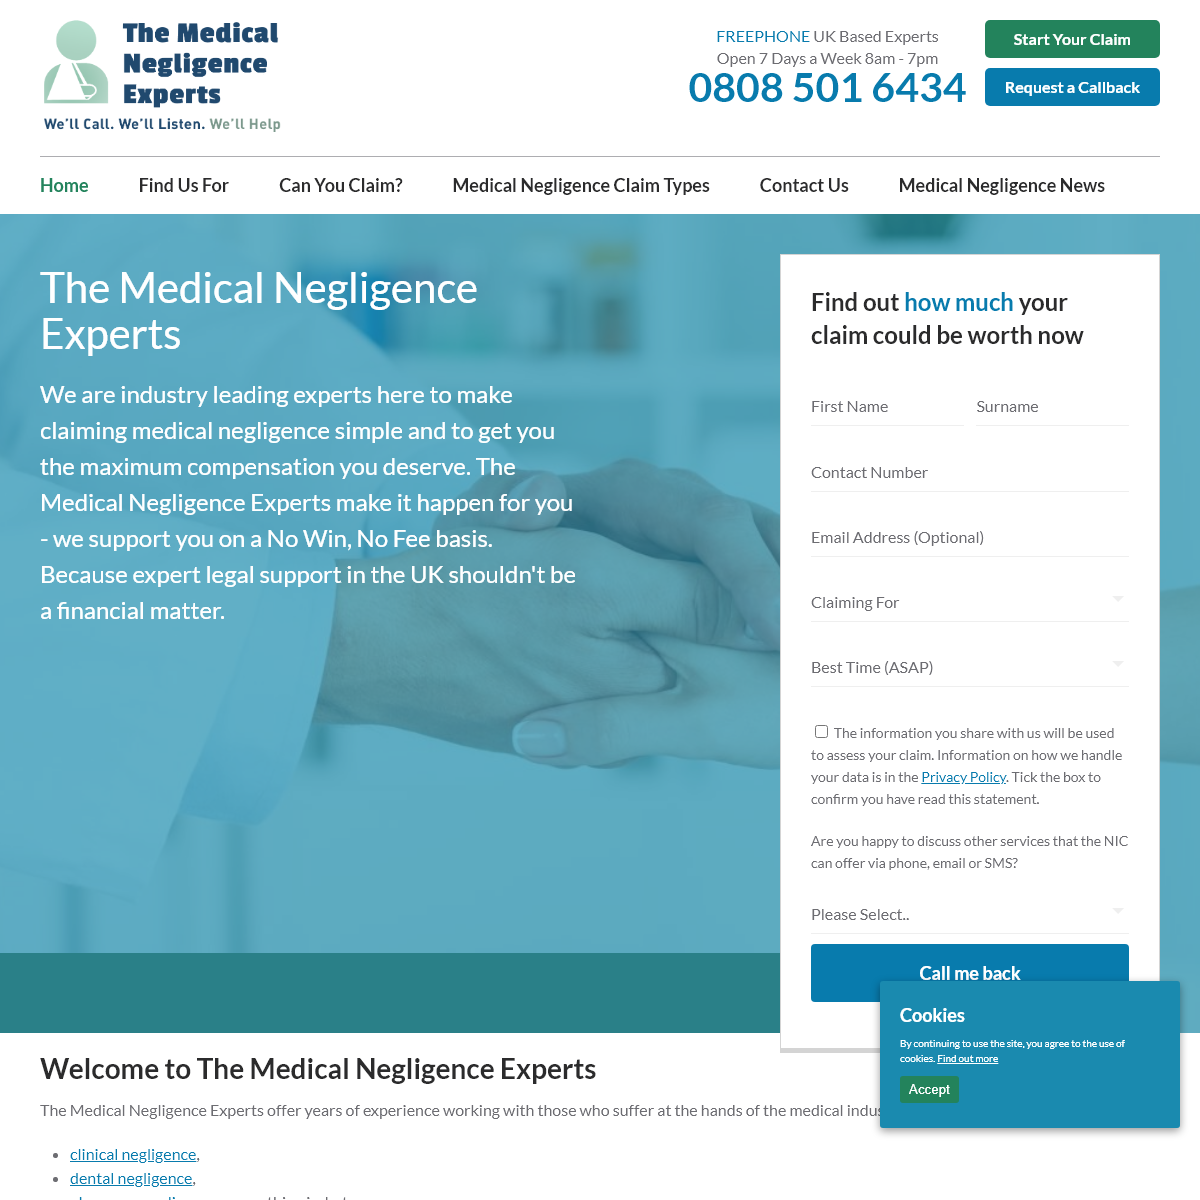 A complete backup of the-medical-negligence-experts.co.uk